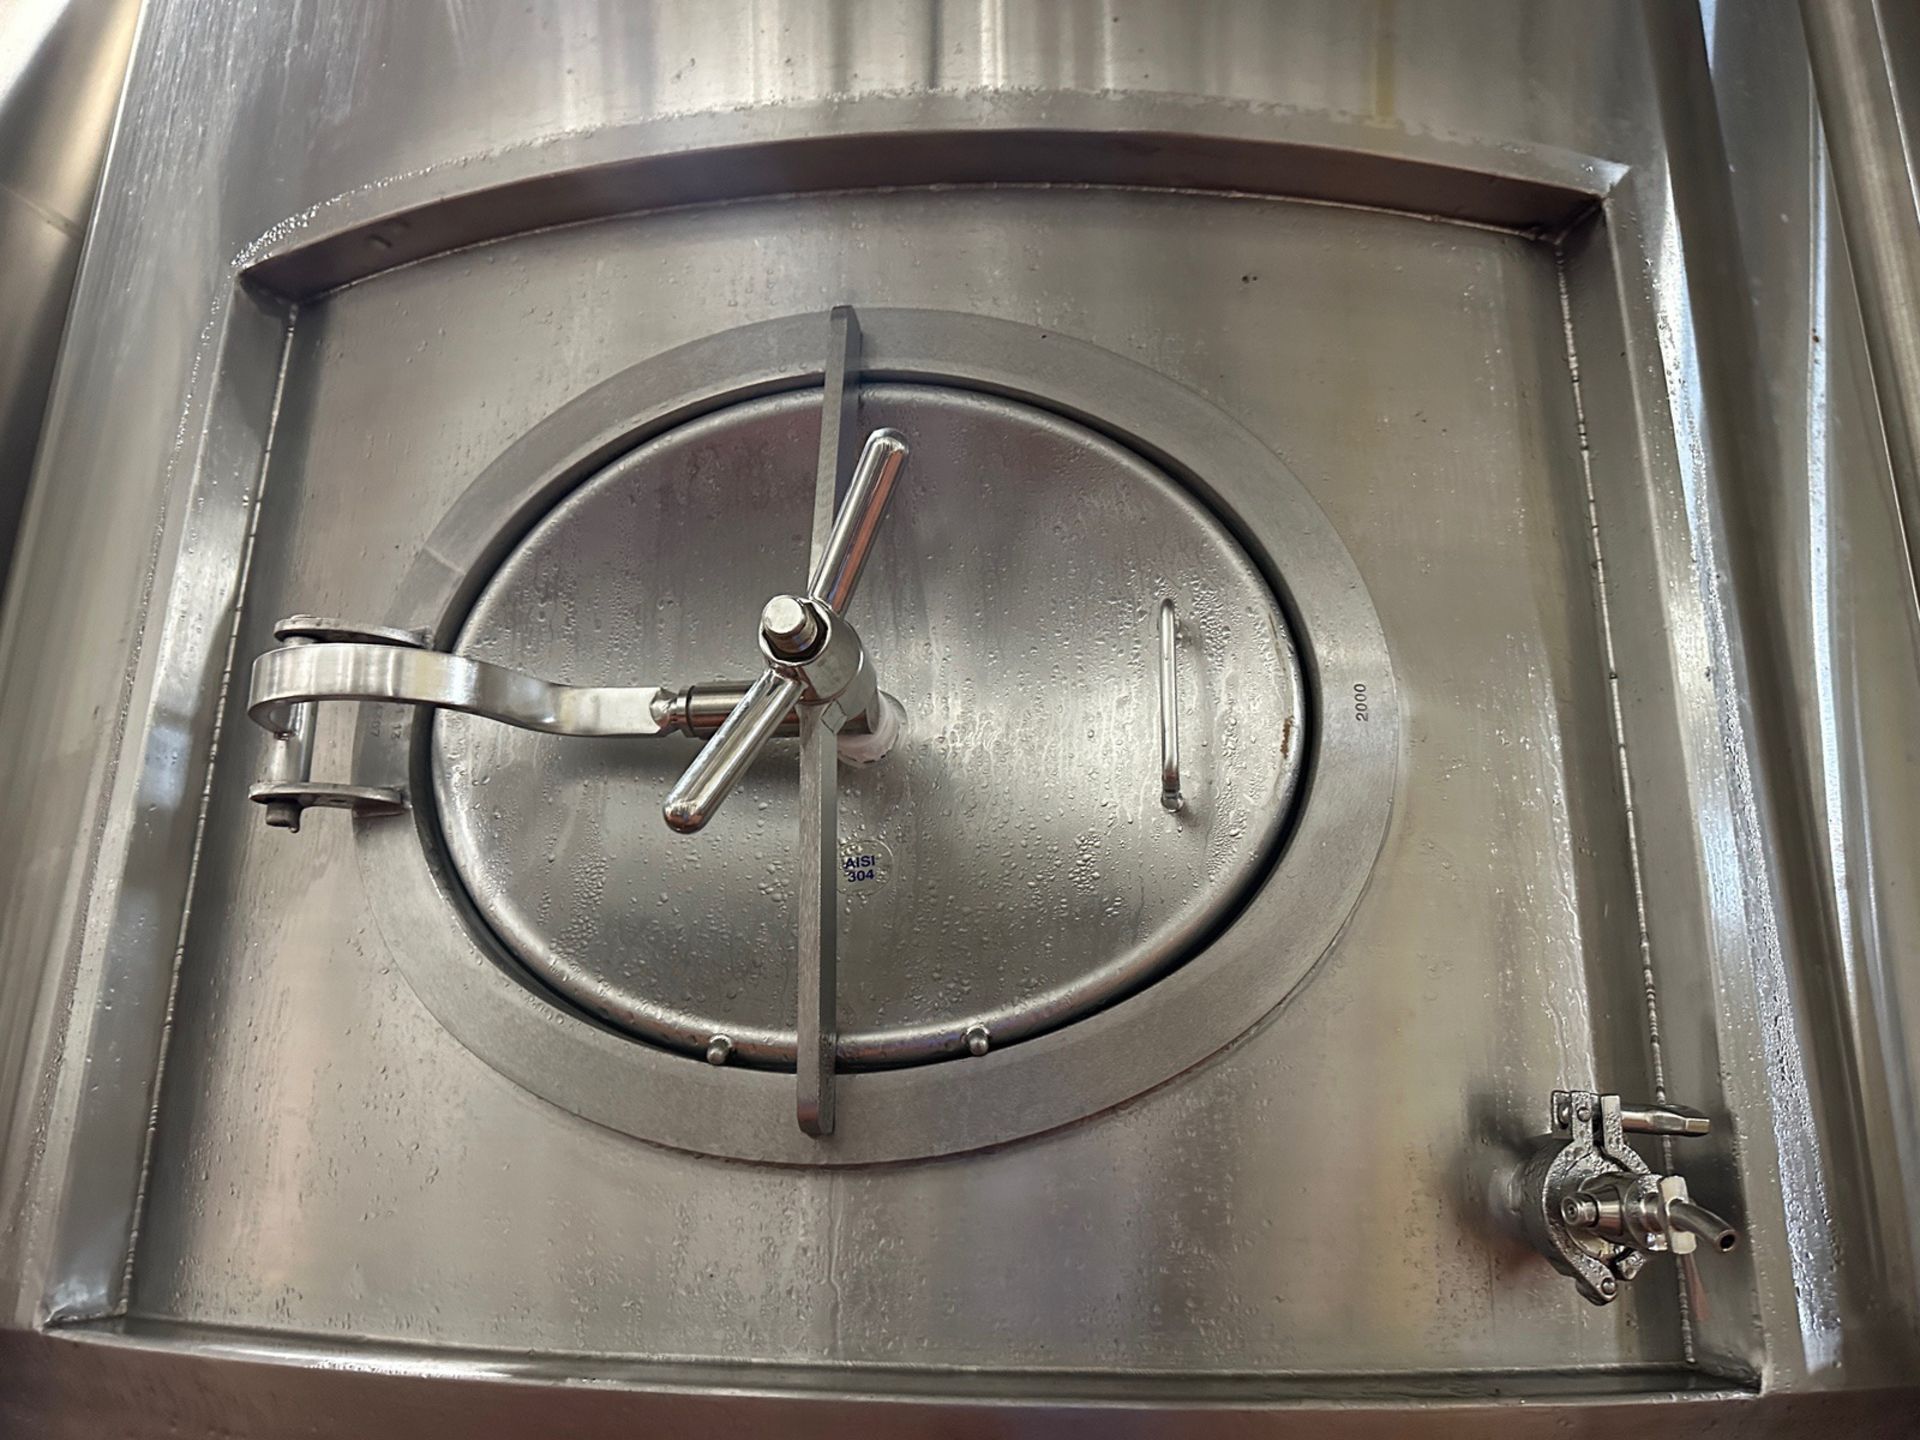 2015 - 60 BBL Specific Mechanical Stainless Steel Fermentation Tank - Cone Bottom, | Rig Fee $1550 - Image 6 of 9